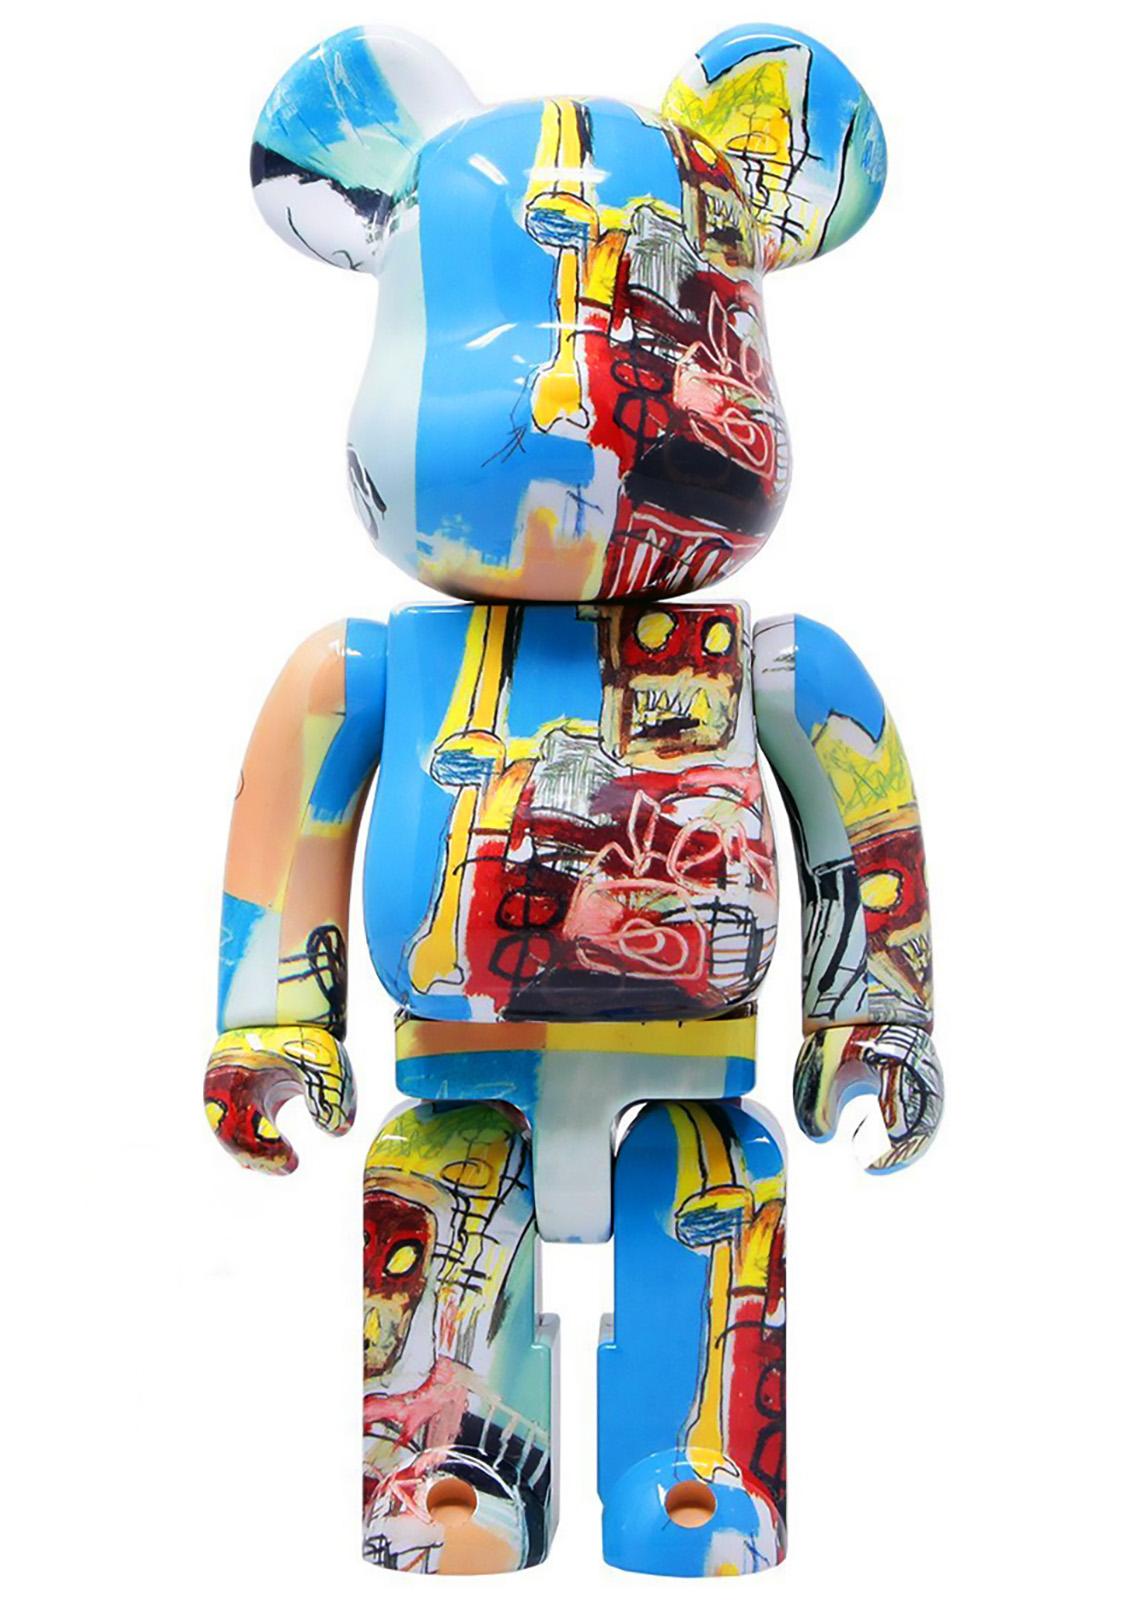 Bearbrick and Estate of Jean-Michel Basquiat Vinyl Figures: Set of two (400% & 100%):
A unique, timeless collectible trademarked & licensed by the Estate of Jean-Michel Basquiat. The partnered collectible reveals details from Basquiat's untitled